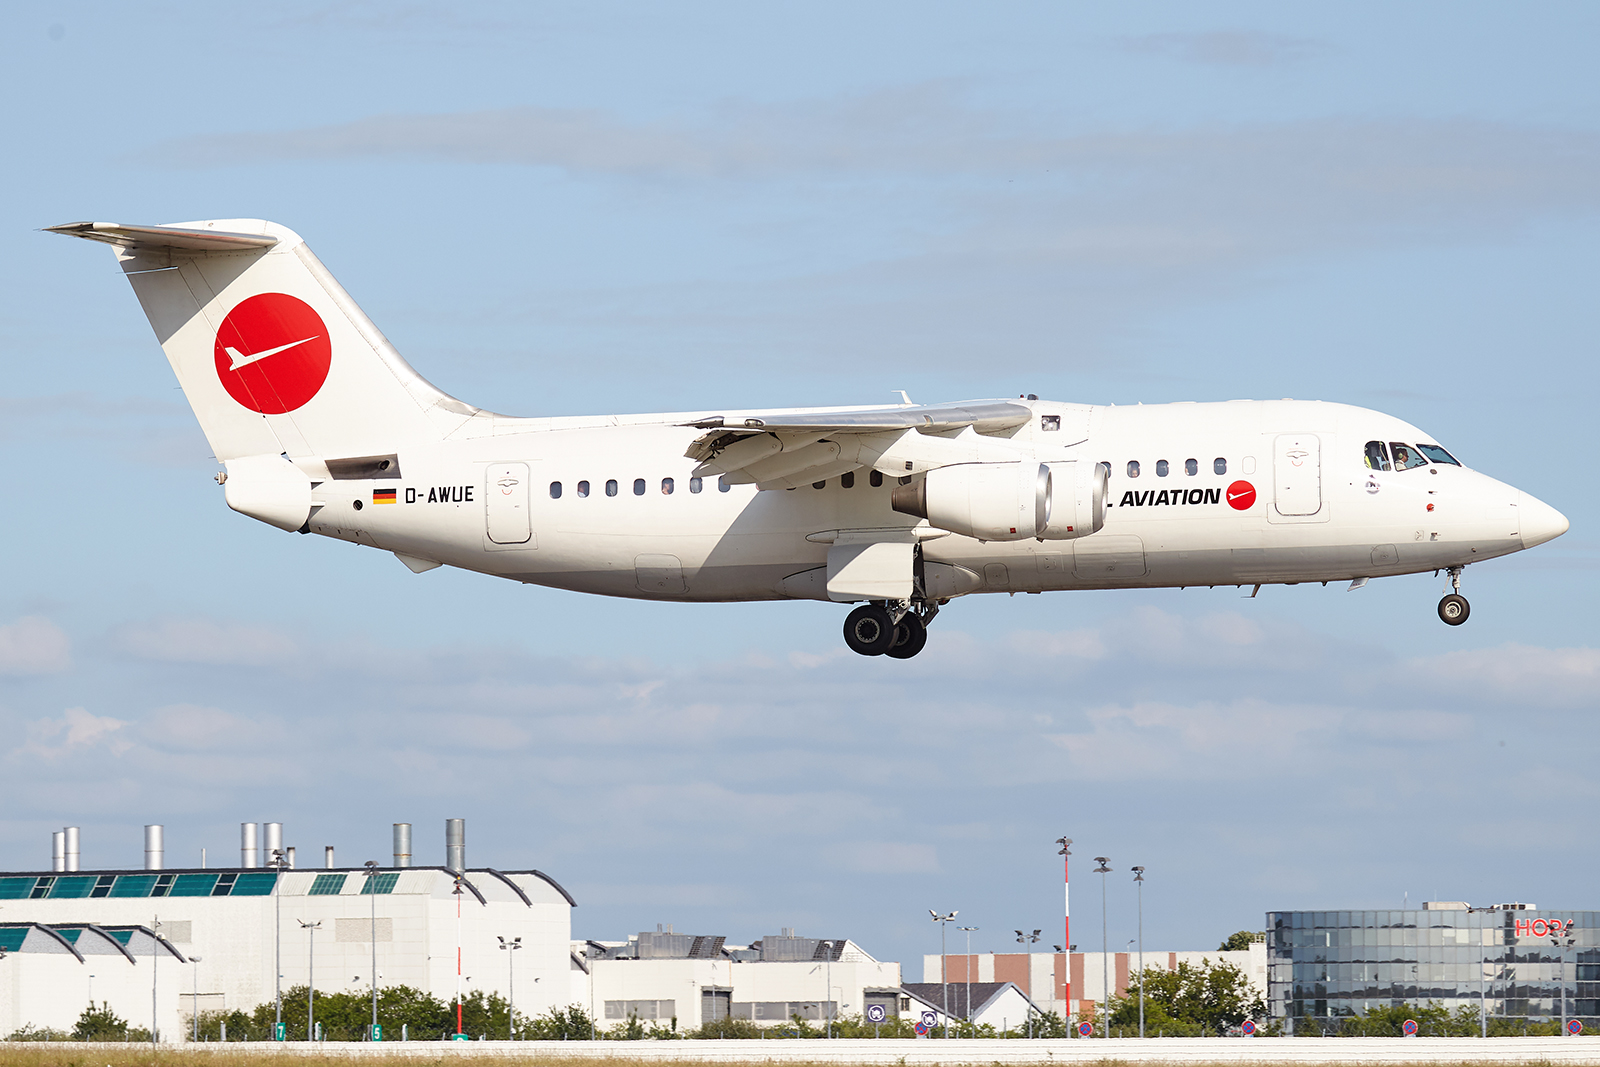  [02/06/2019] Bae145 (D-AWUE) WDL Aviation 1906040541235493216262183